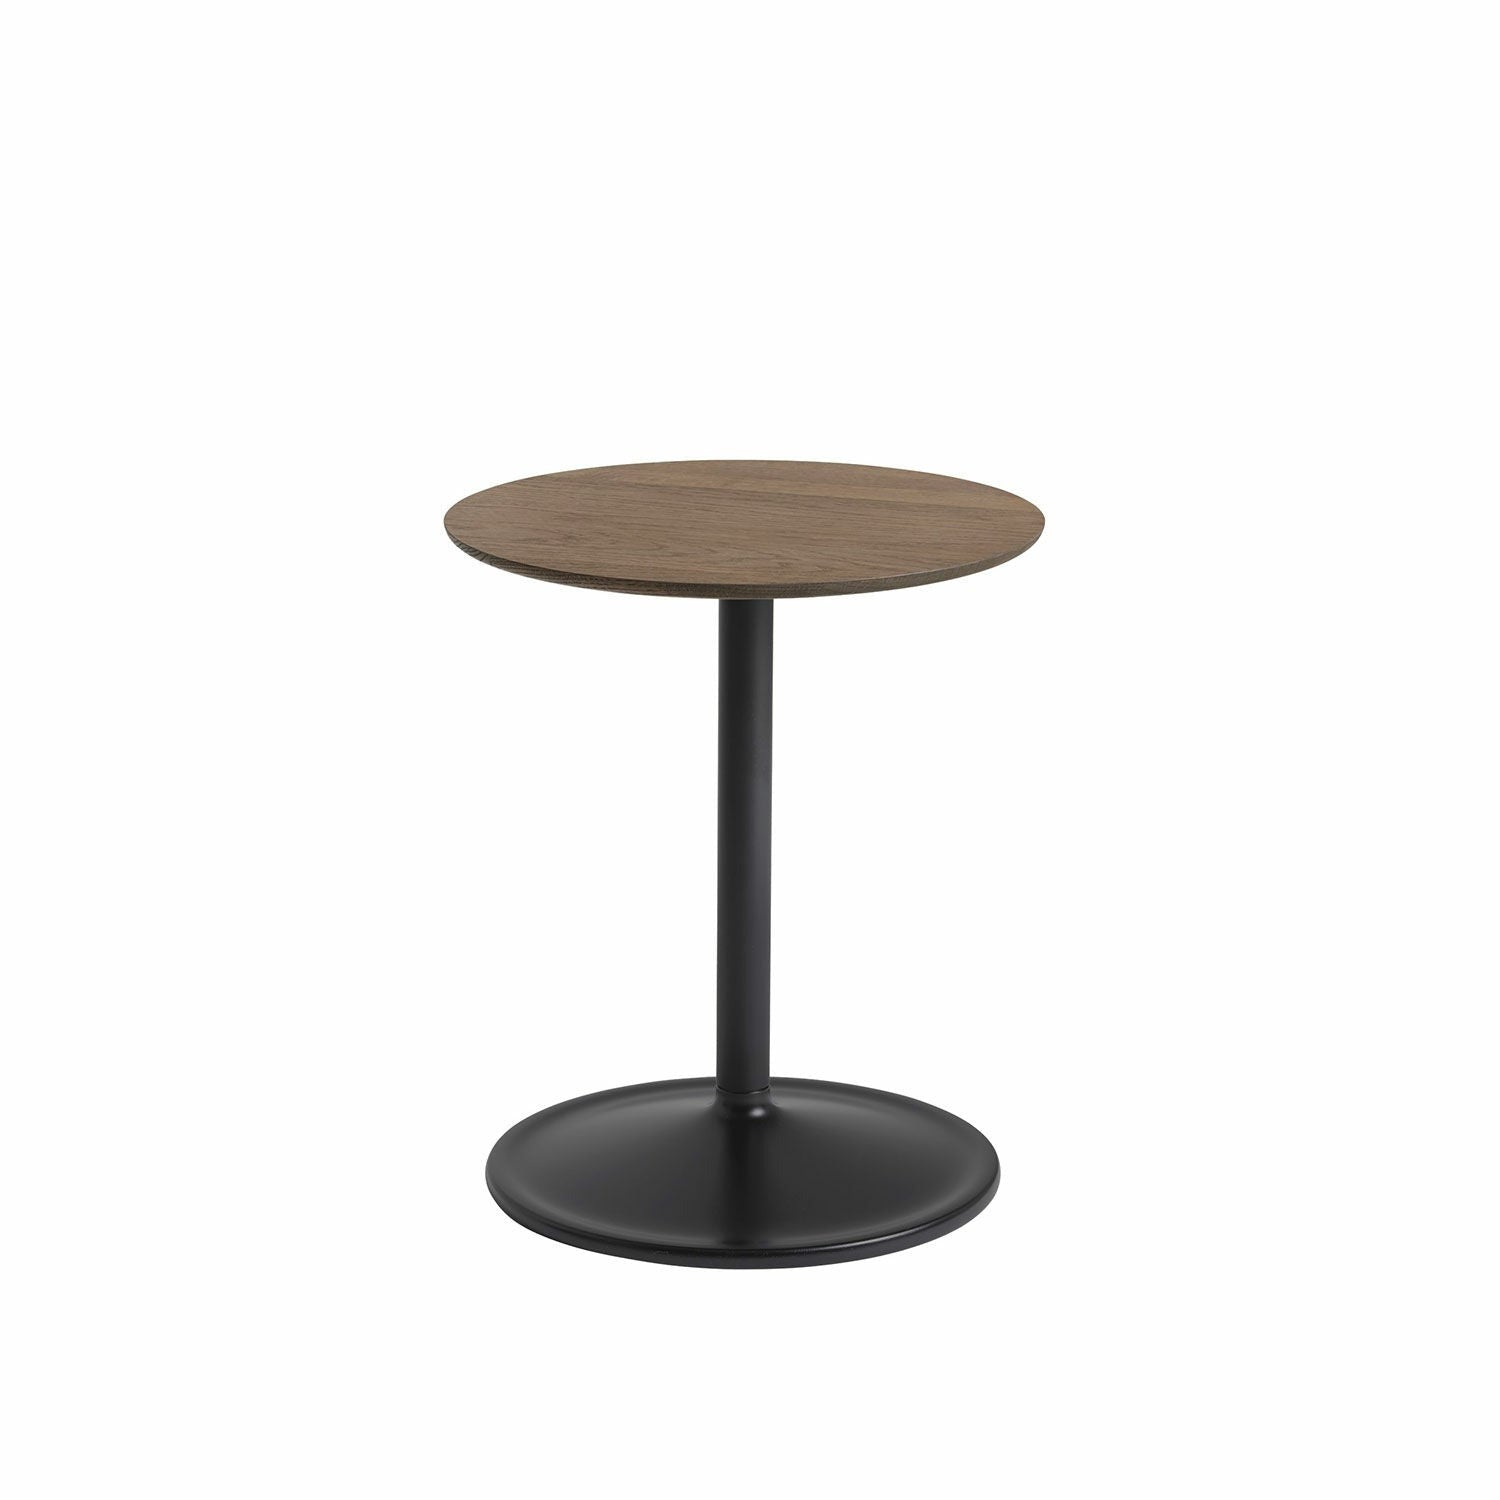 muuto_soft_side_table_solid_smoked-tall.jpeg__PID:0a009149-73d2-45b5-a947-3610ffb00371